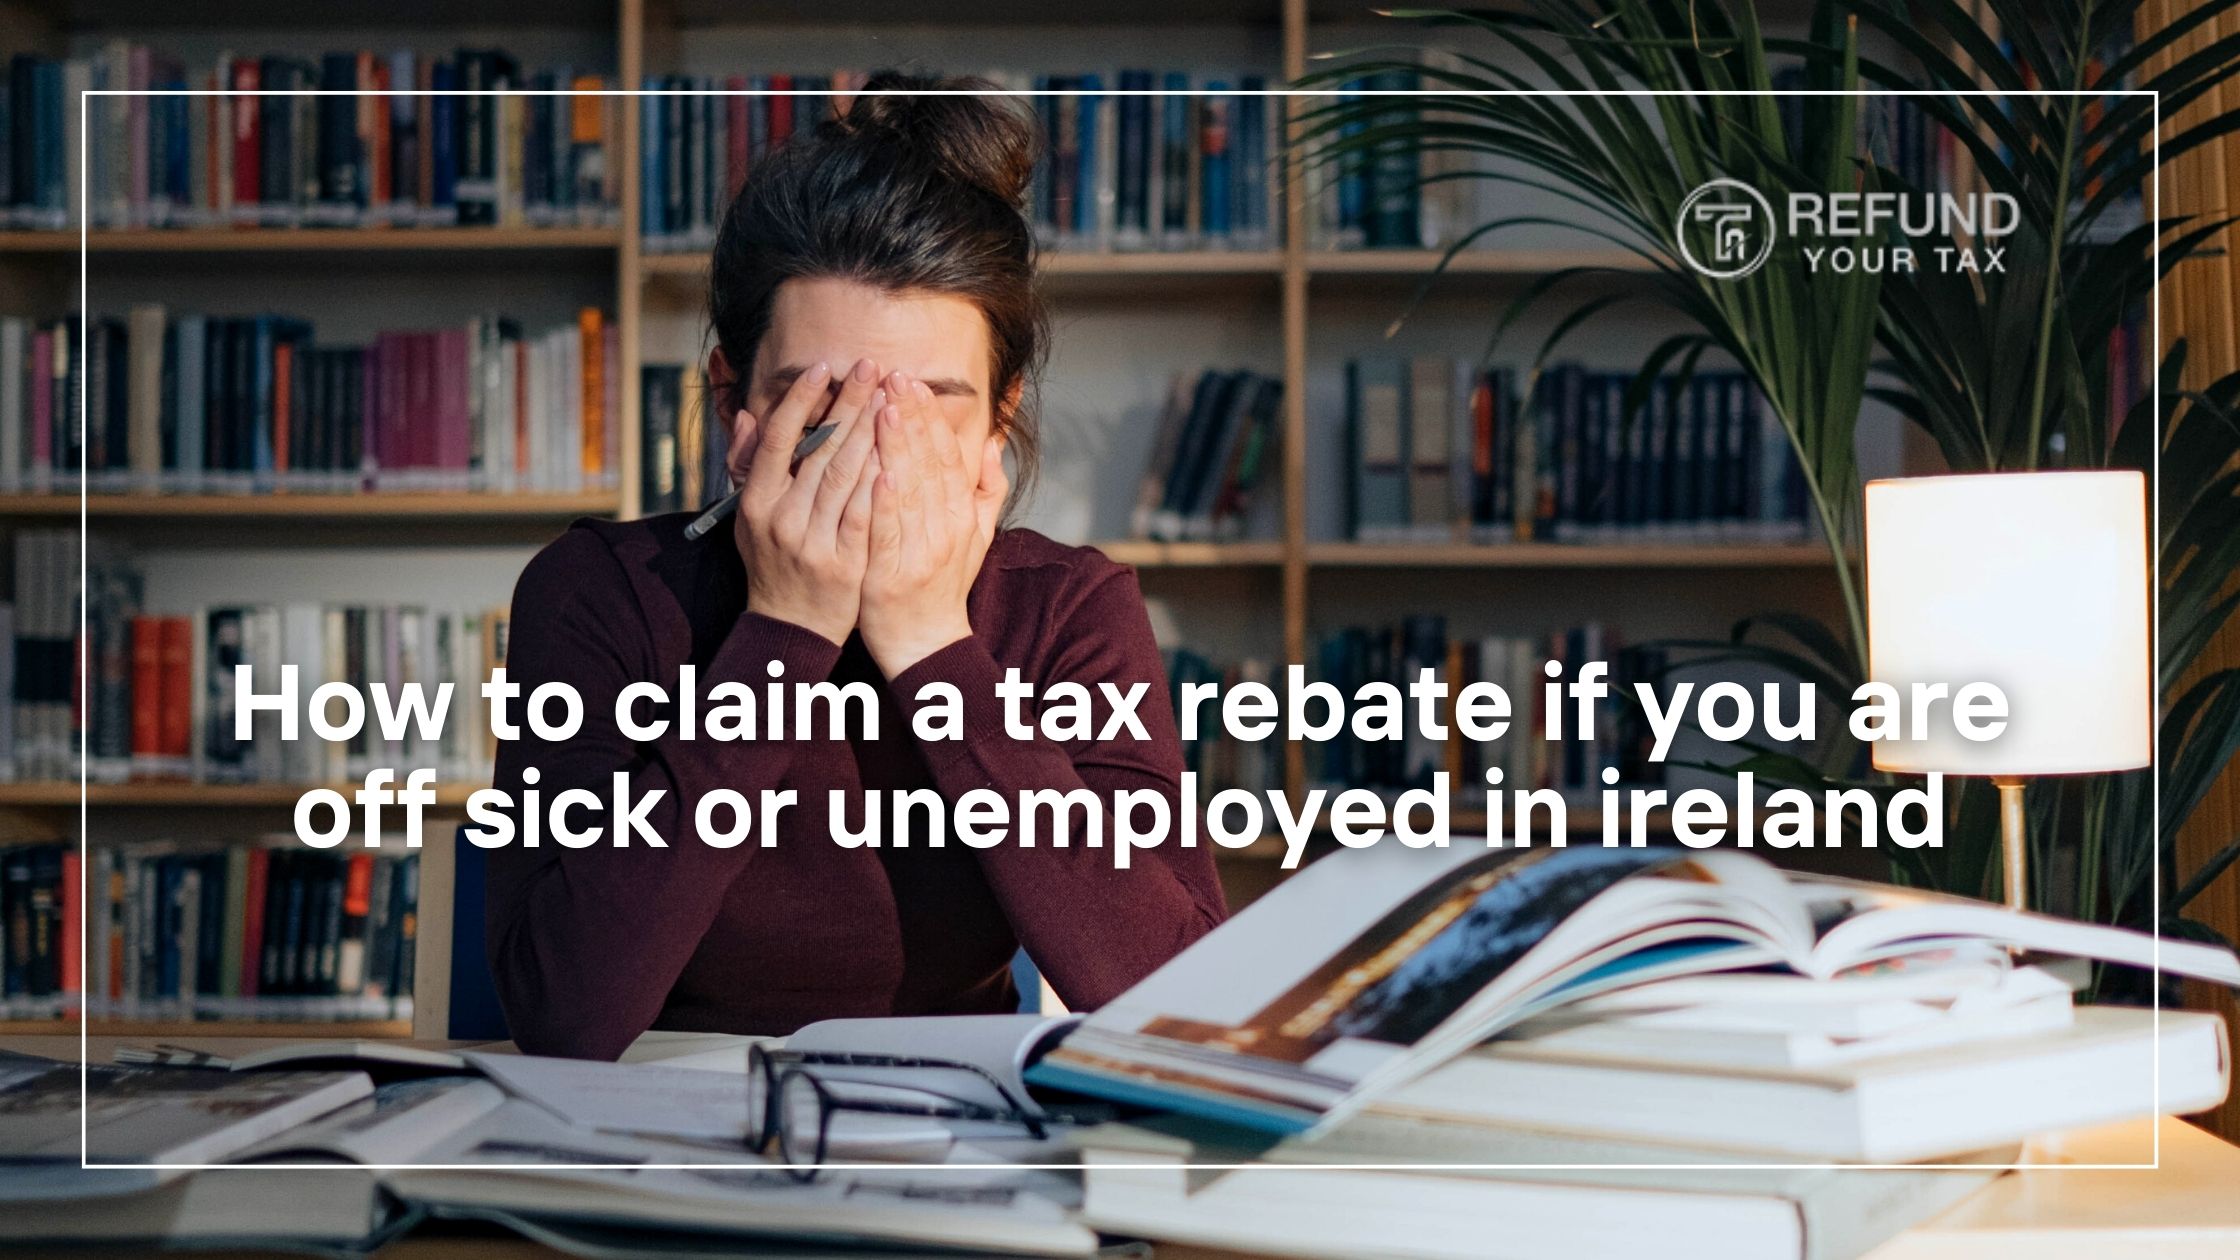 Can I Get Tax Rebate When Unemployed Or Out Of Work Sick Refund Your Tax